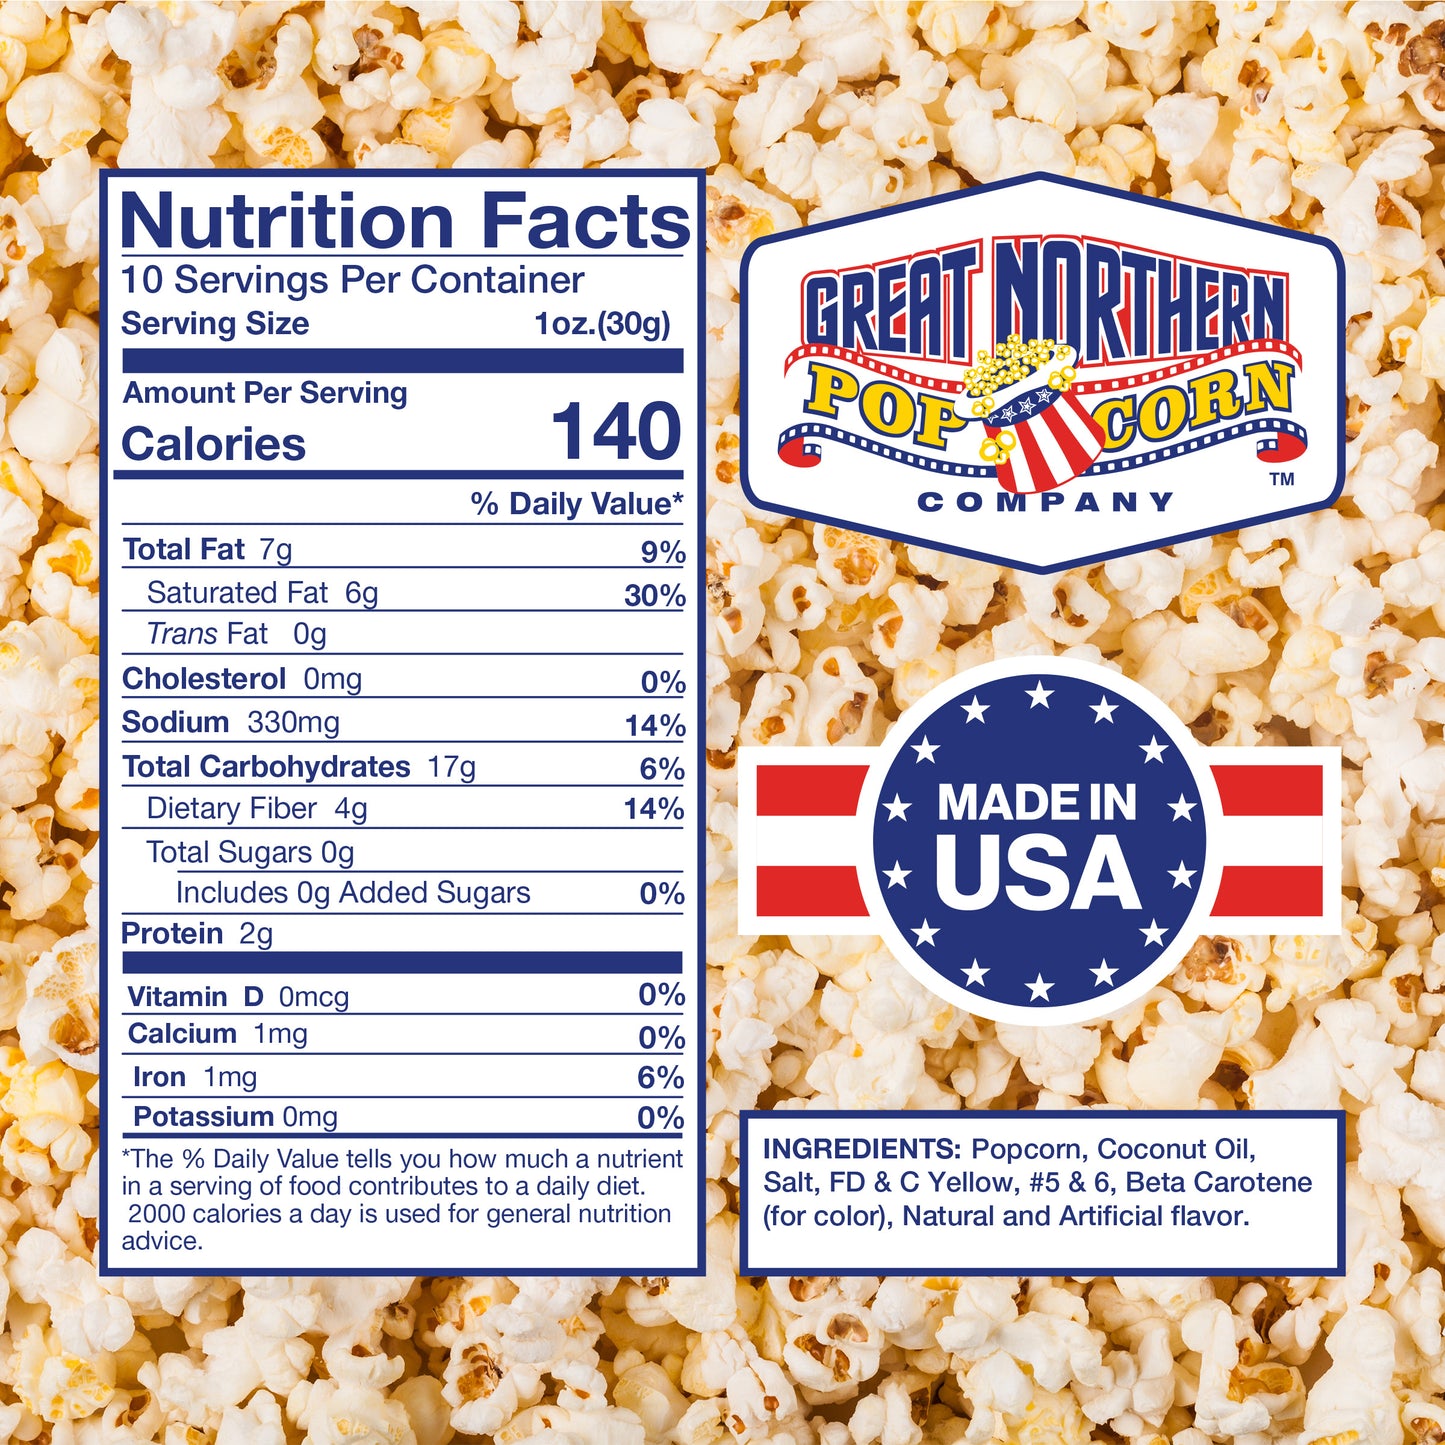 100 Popcorn Bags and 10 Ounce All-in-One Popcorn Packs  – Case of 24